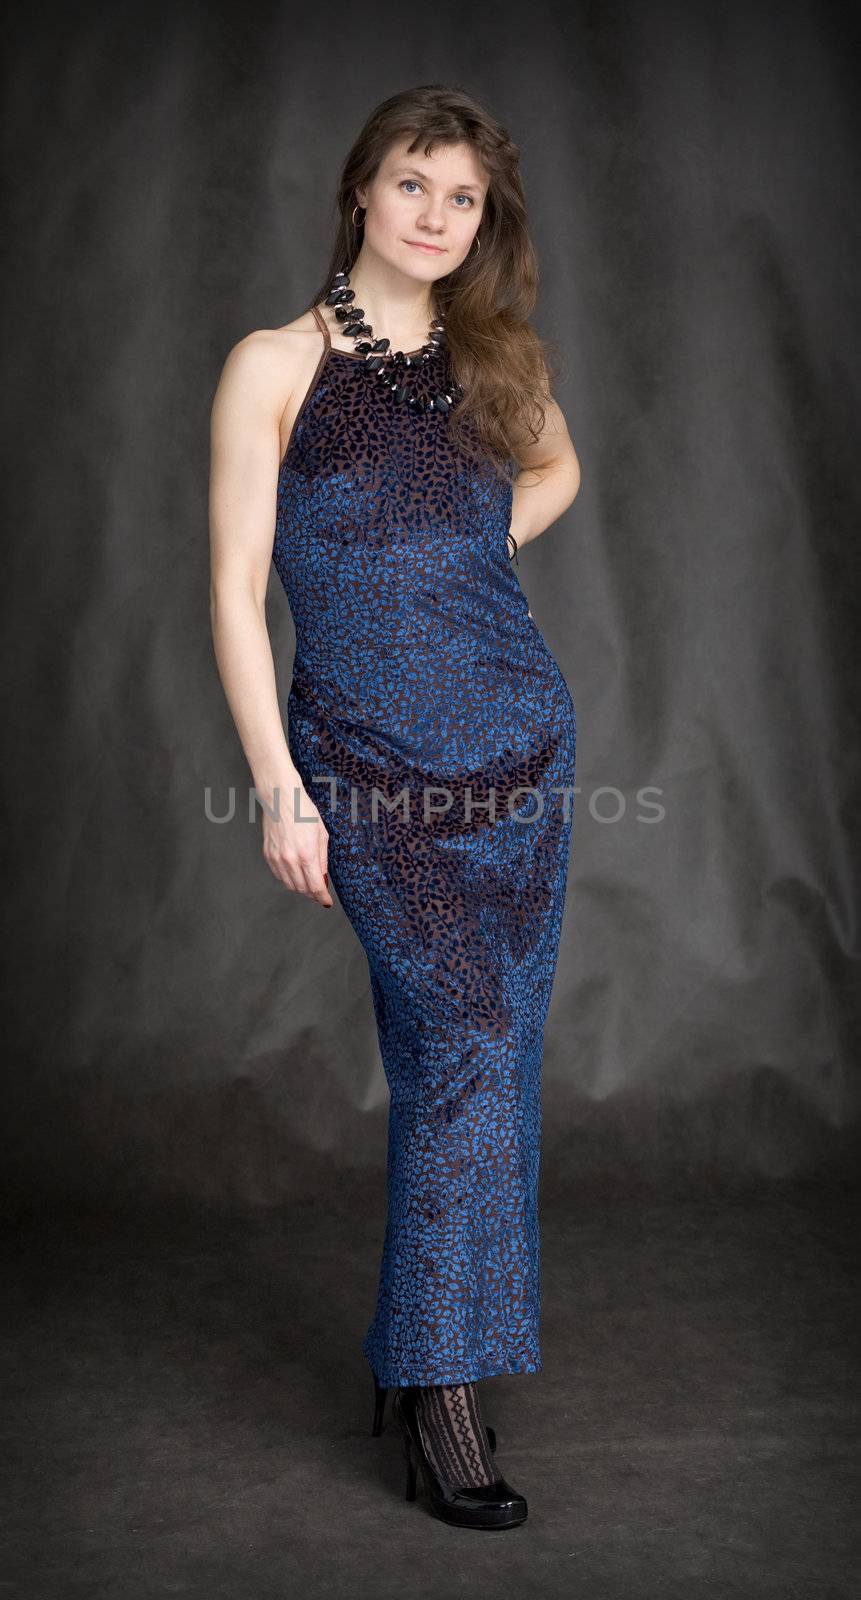 The girl in a dark blue evening dress on a black background